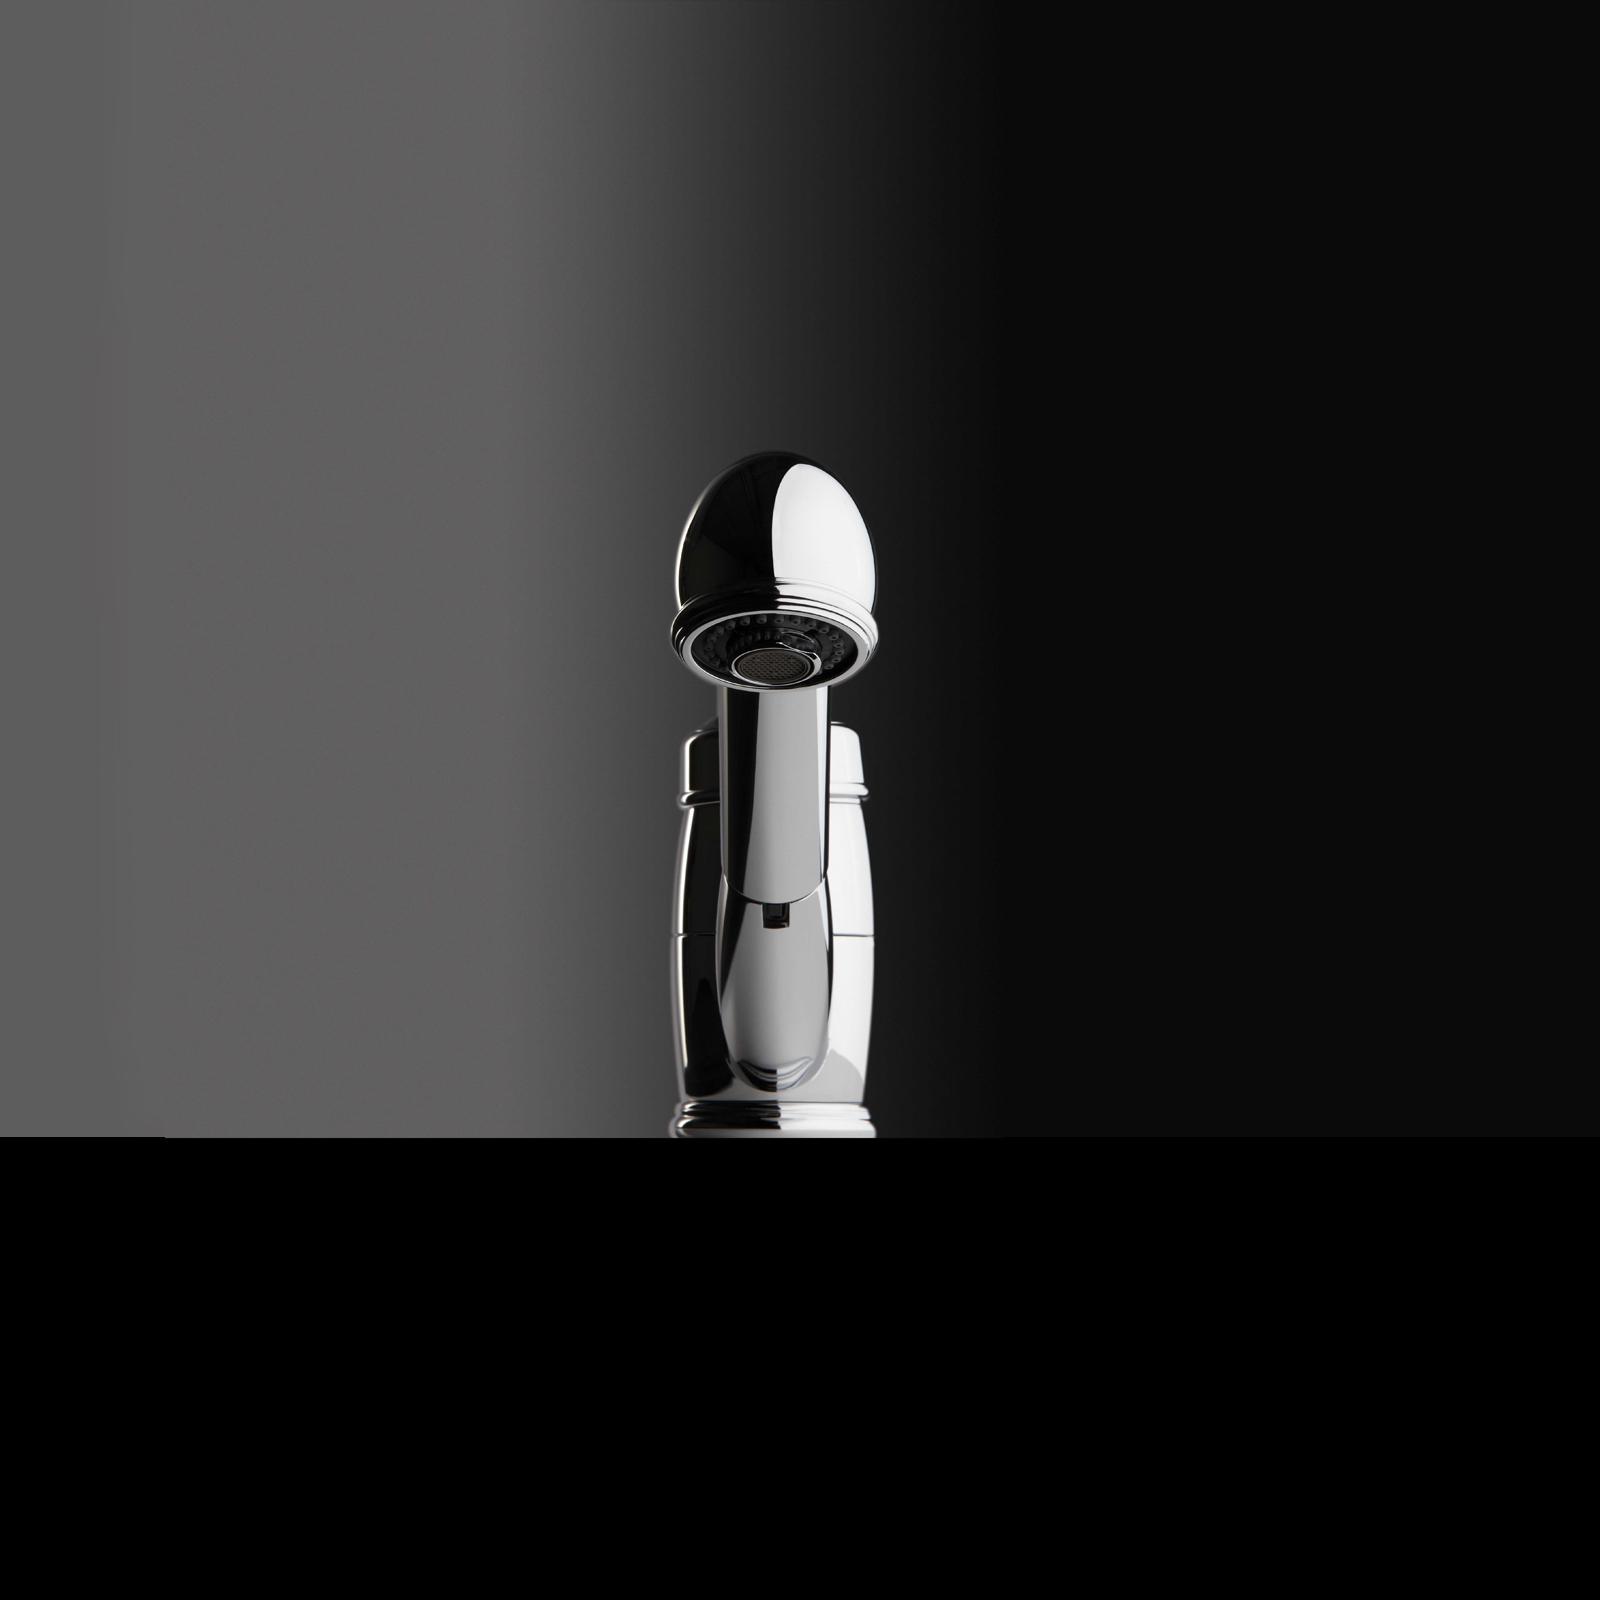 High-quality single lever tap Lionor - pull out spray - Chrome - ambience 2